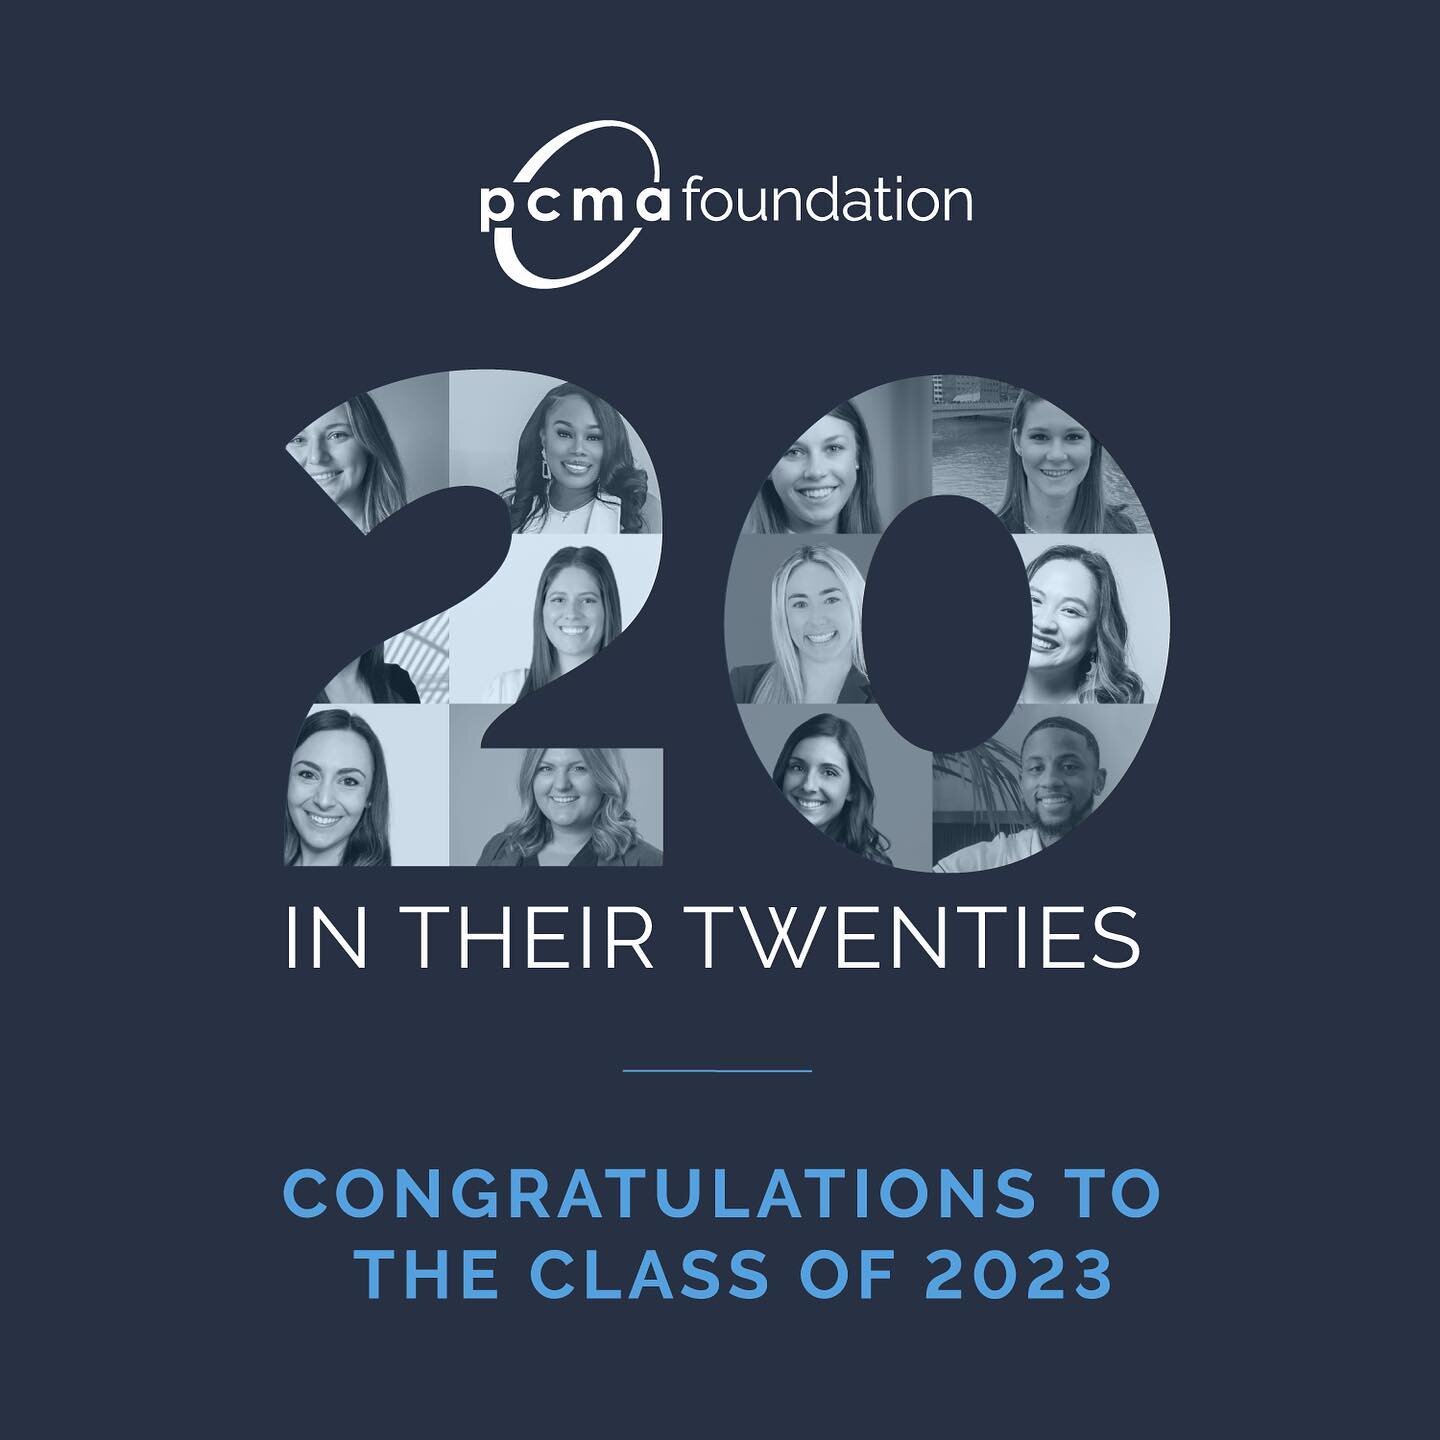 Congratulations to Soundings Chief of Staff @serenikkity for being recognized as one of @pcmahq&rsquo;s &ldquo;20 in their Twenties&rdquo;!! 

&ldquo;My ultimate career goal is to create a clear pathway for new talent to find their place within the b